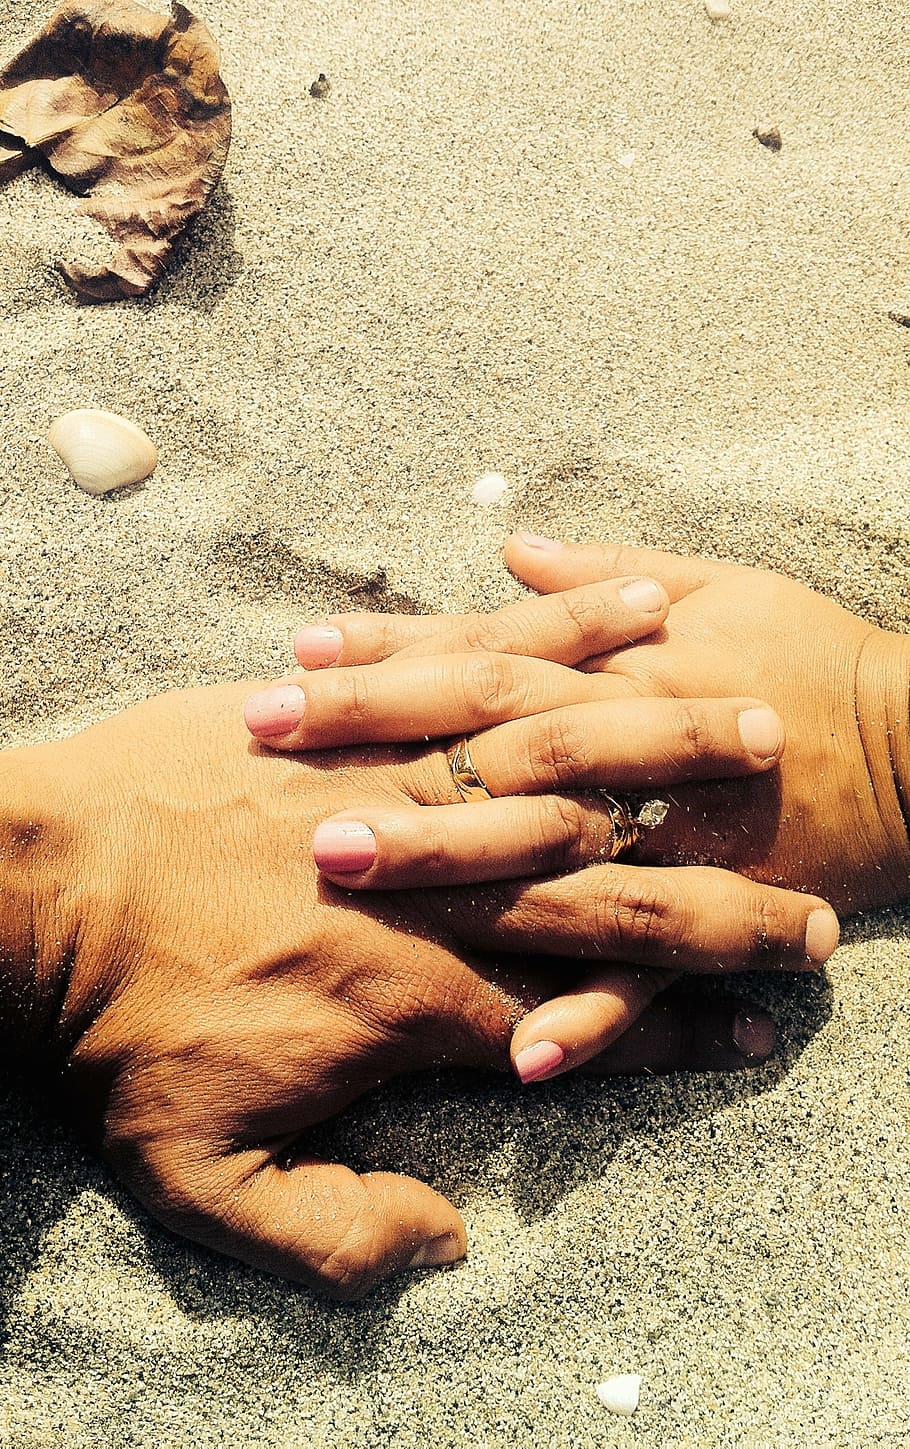 close-up photography, two, persons palm, gray, sand, human, holding, hands, holding hands, engagement